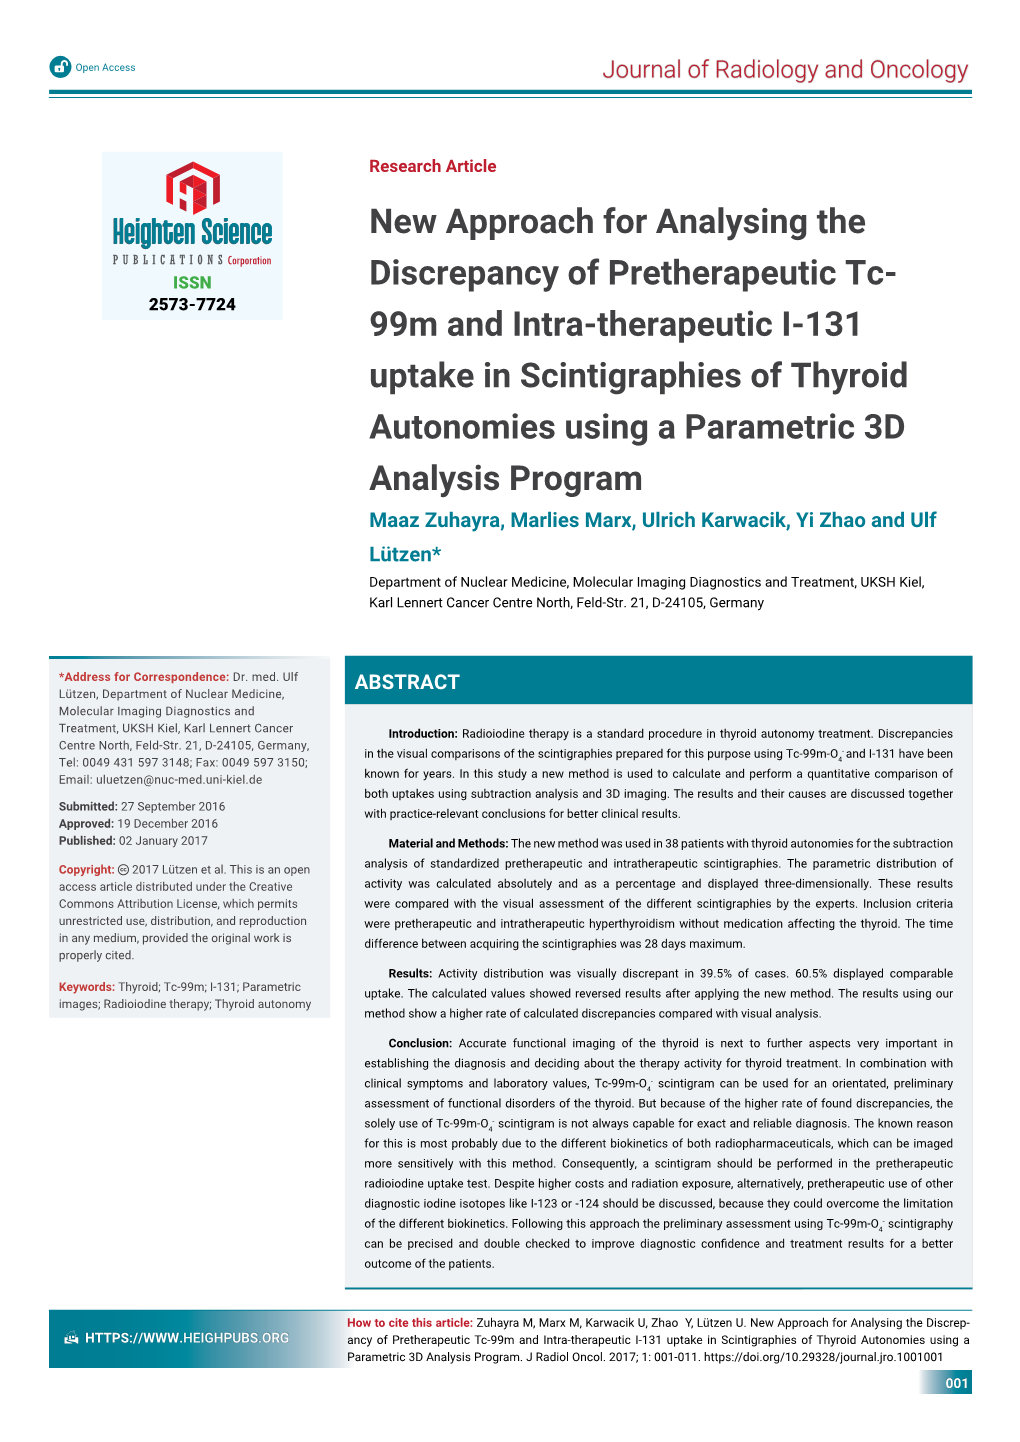 New Approach for Analysing the Discrepancy of Pretherapeutic Tc